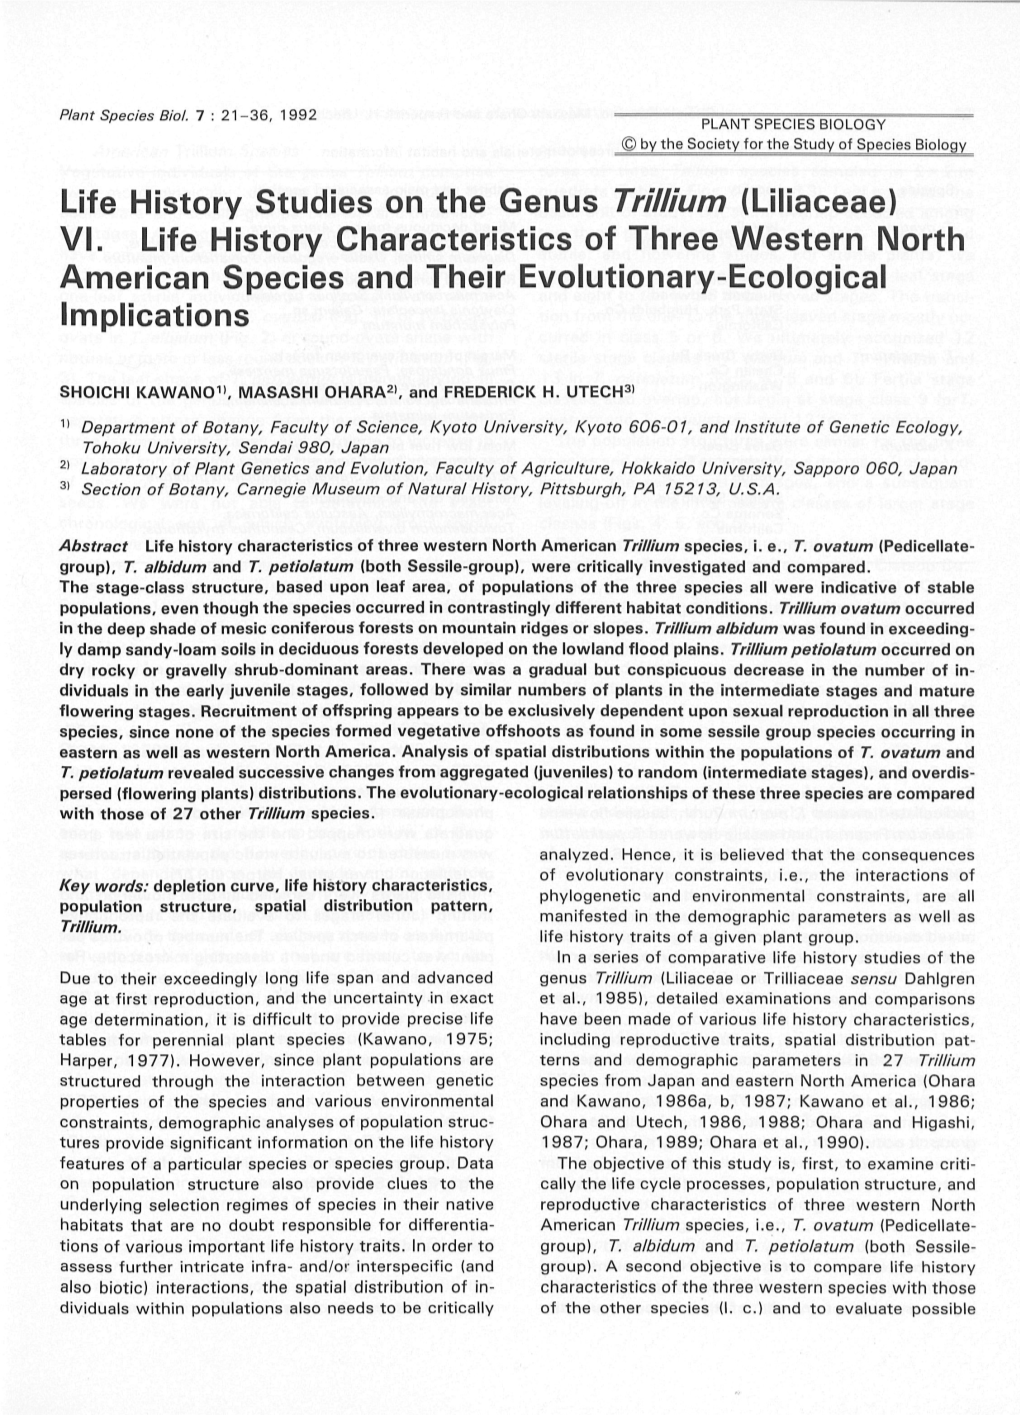 VL Life History Characteristics of Three Western North American Species and Their Evolutionary-Ecological Implications